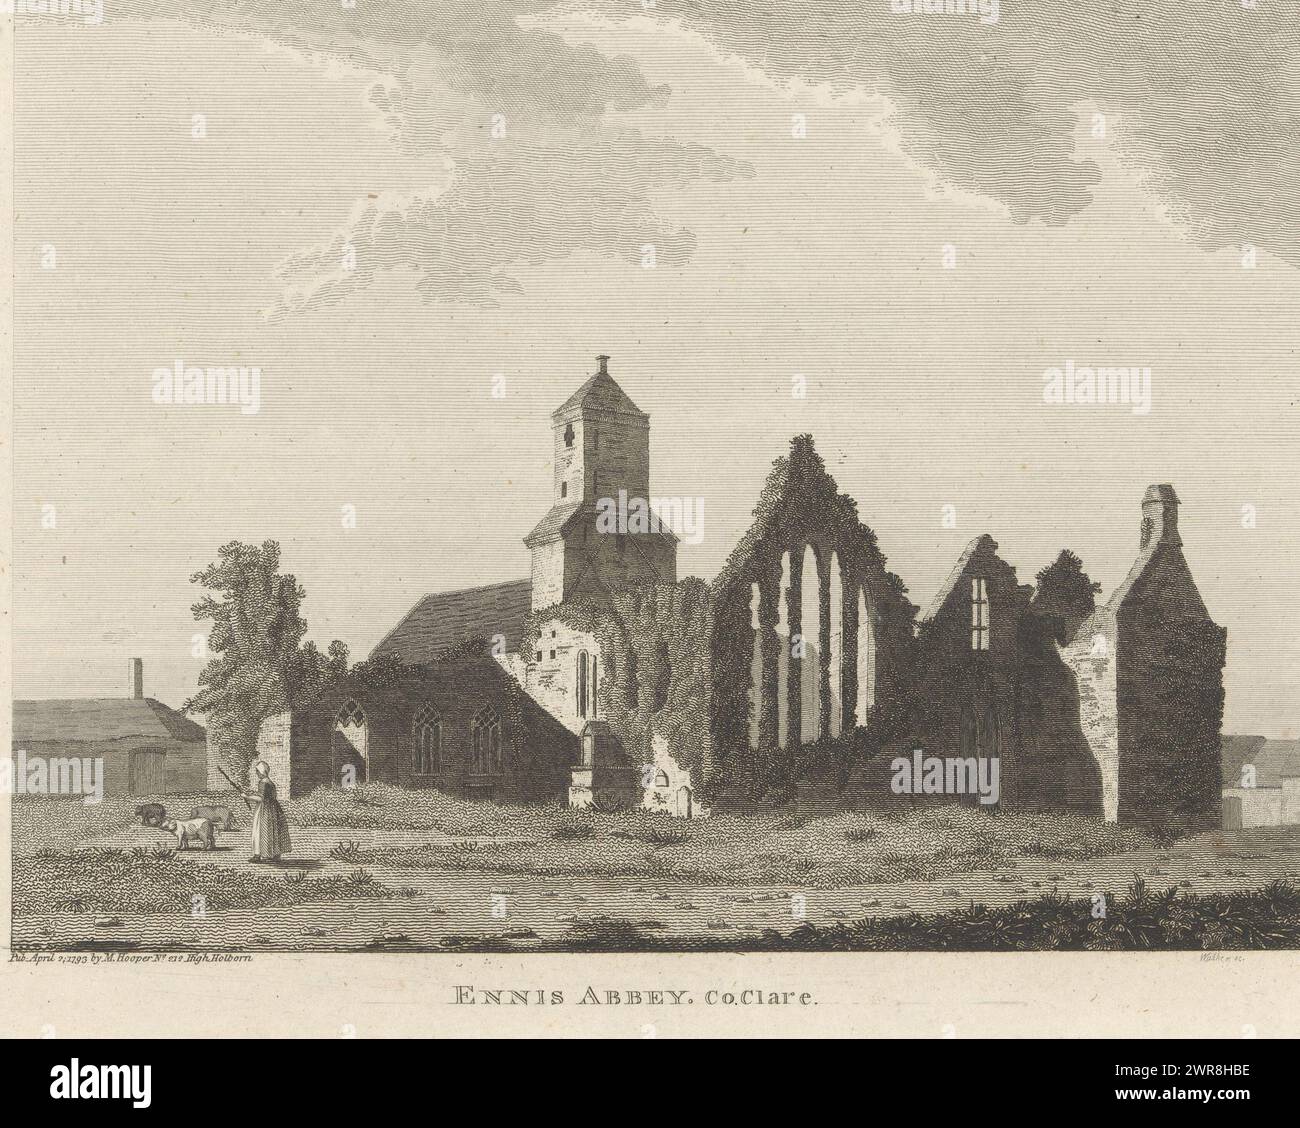 View of Ennis Abbey, Ennis Abbey. Co.Clare (title on object), This print is part of a book., print maker: Walker, publisher: M. Hooper, London, 2-Apr-1793, paper, etching, height 149 mm × width 200 mm, print Stock Photo